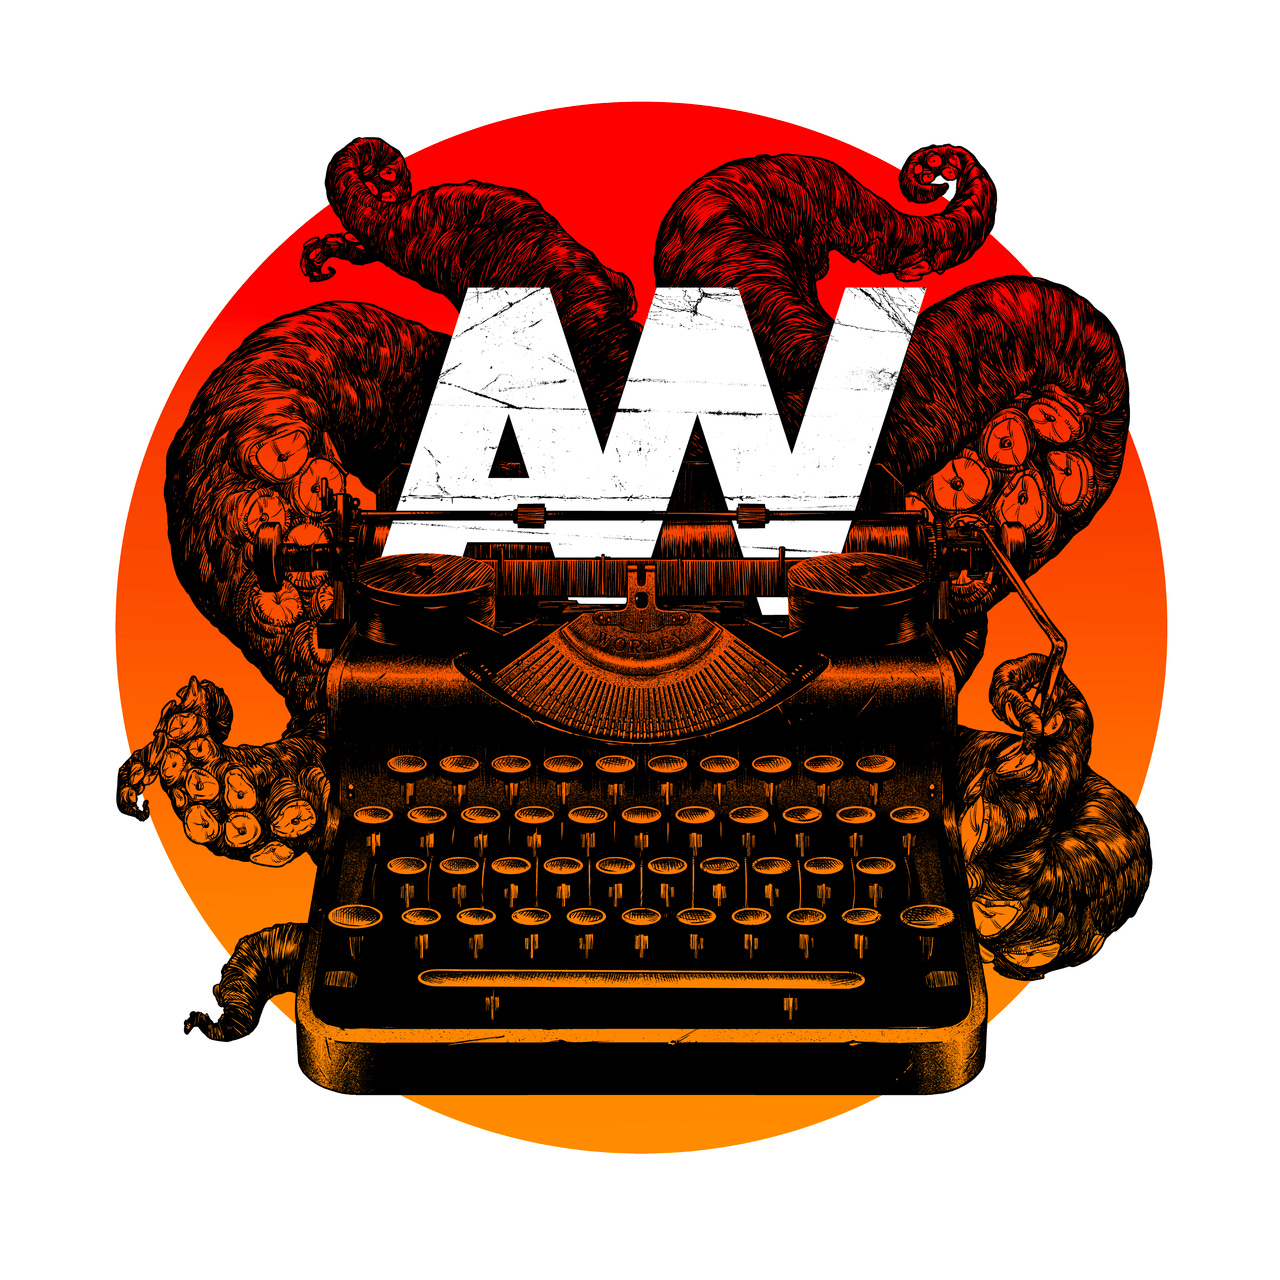 Agent of Weird: Exploring the Write Fantastic